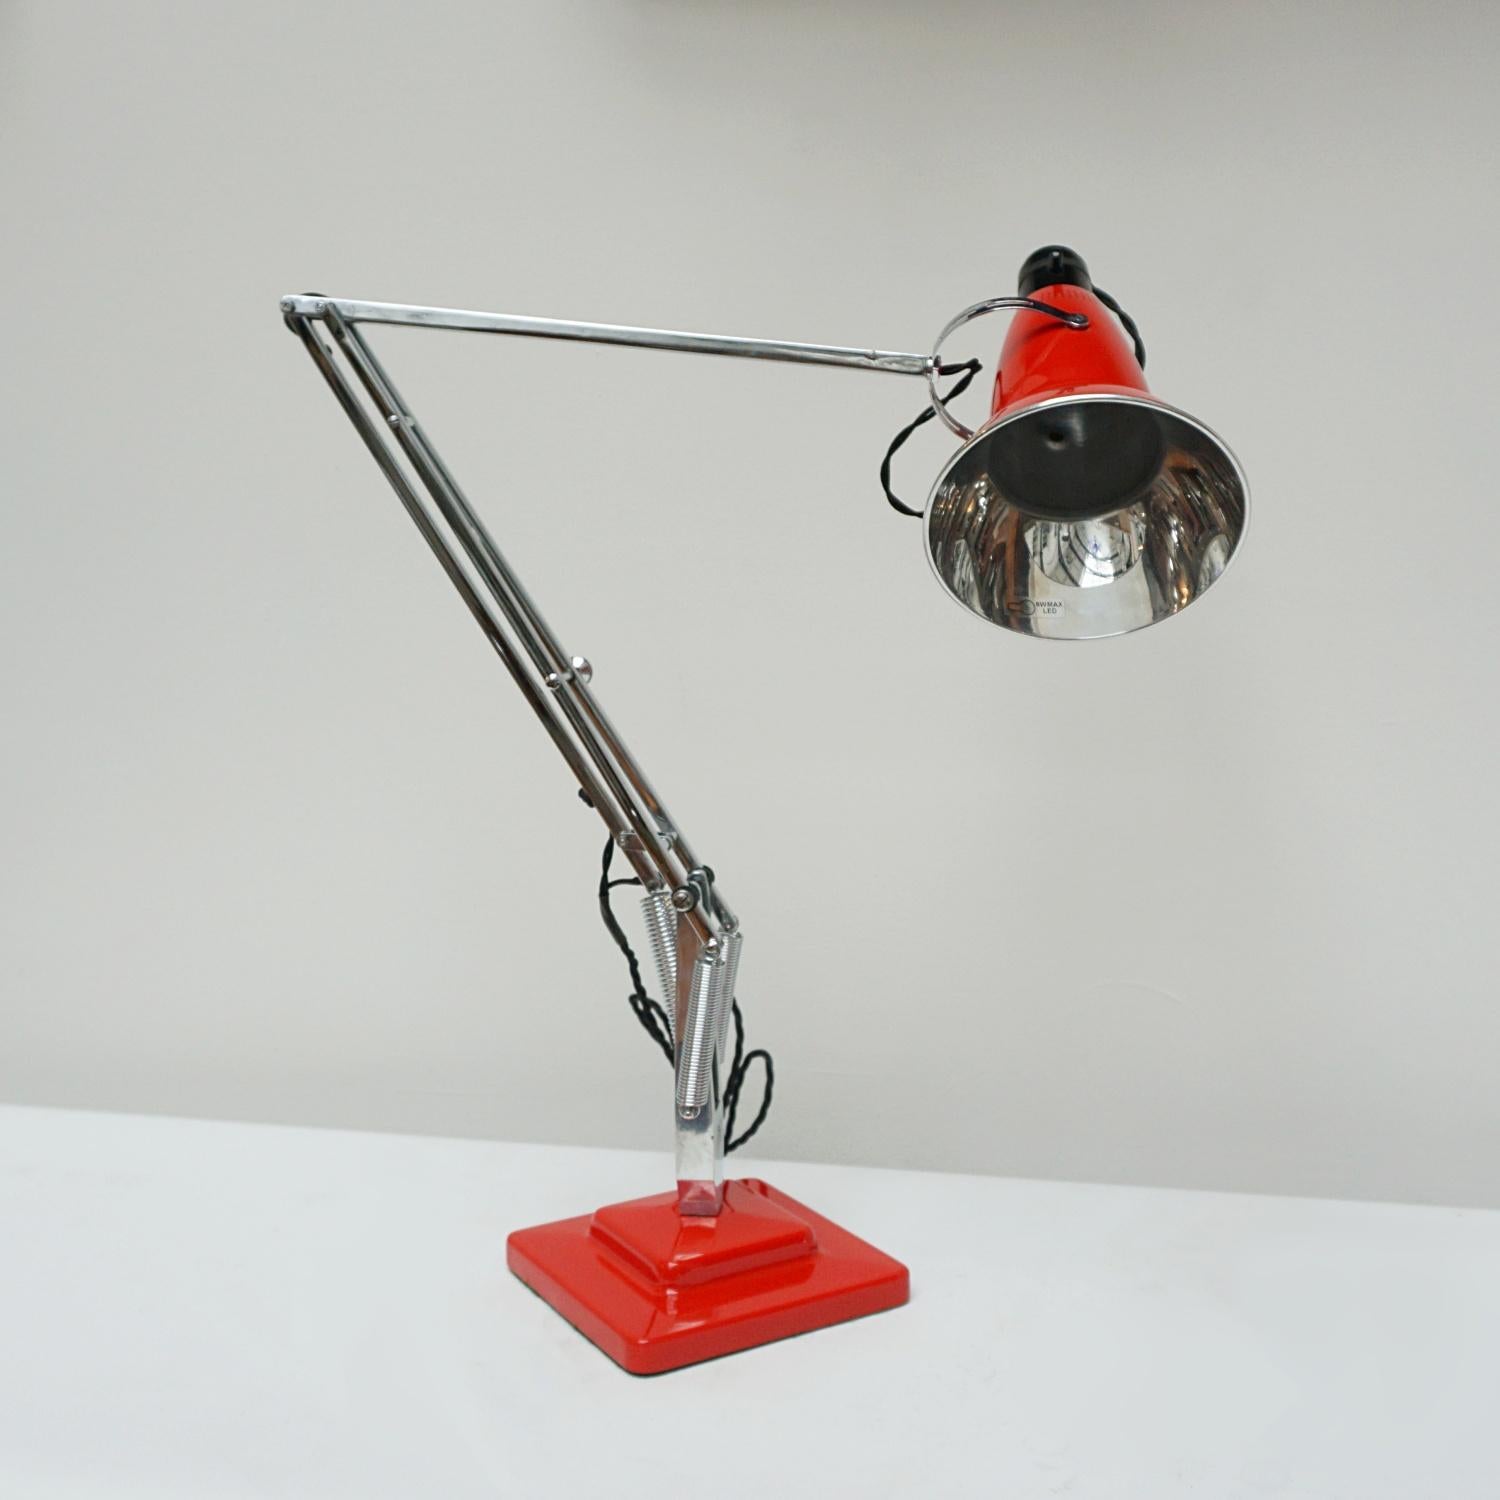 Mid-20th Century An Art Deco Anglepoise Desk Lamp By Herbert Terry & Sons